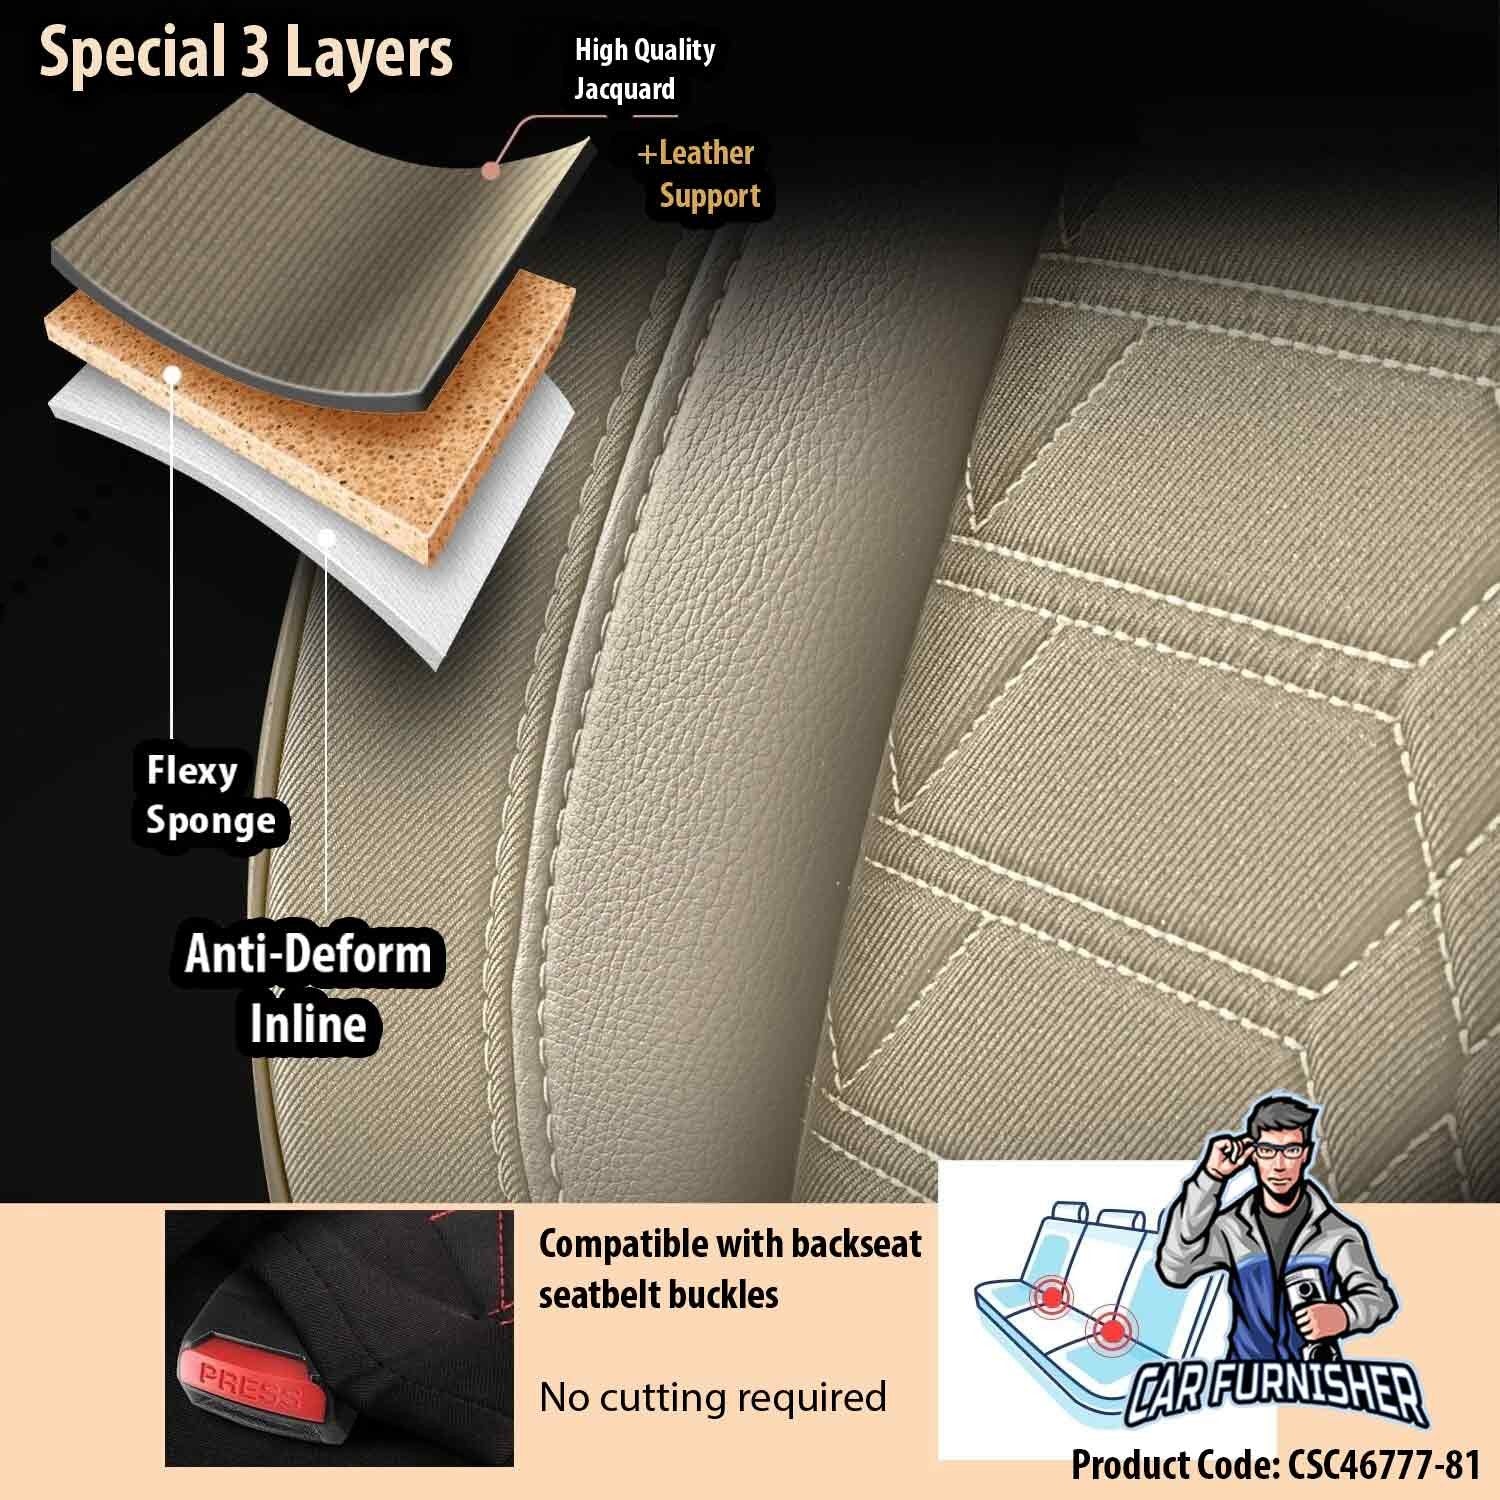 Luxury Car Seat Cover Set (5 Colors) | Venetian Series Beige Style B Leather & Fabric